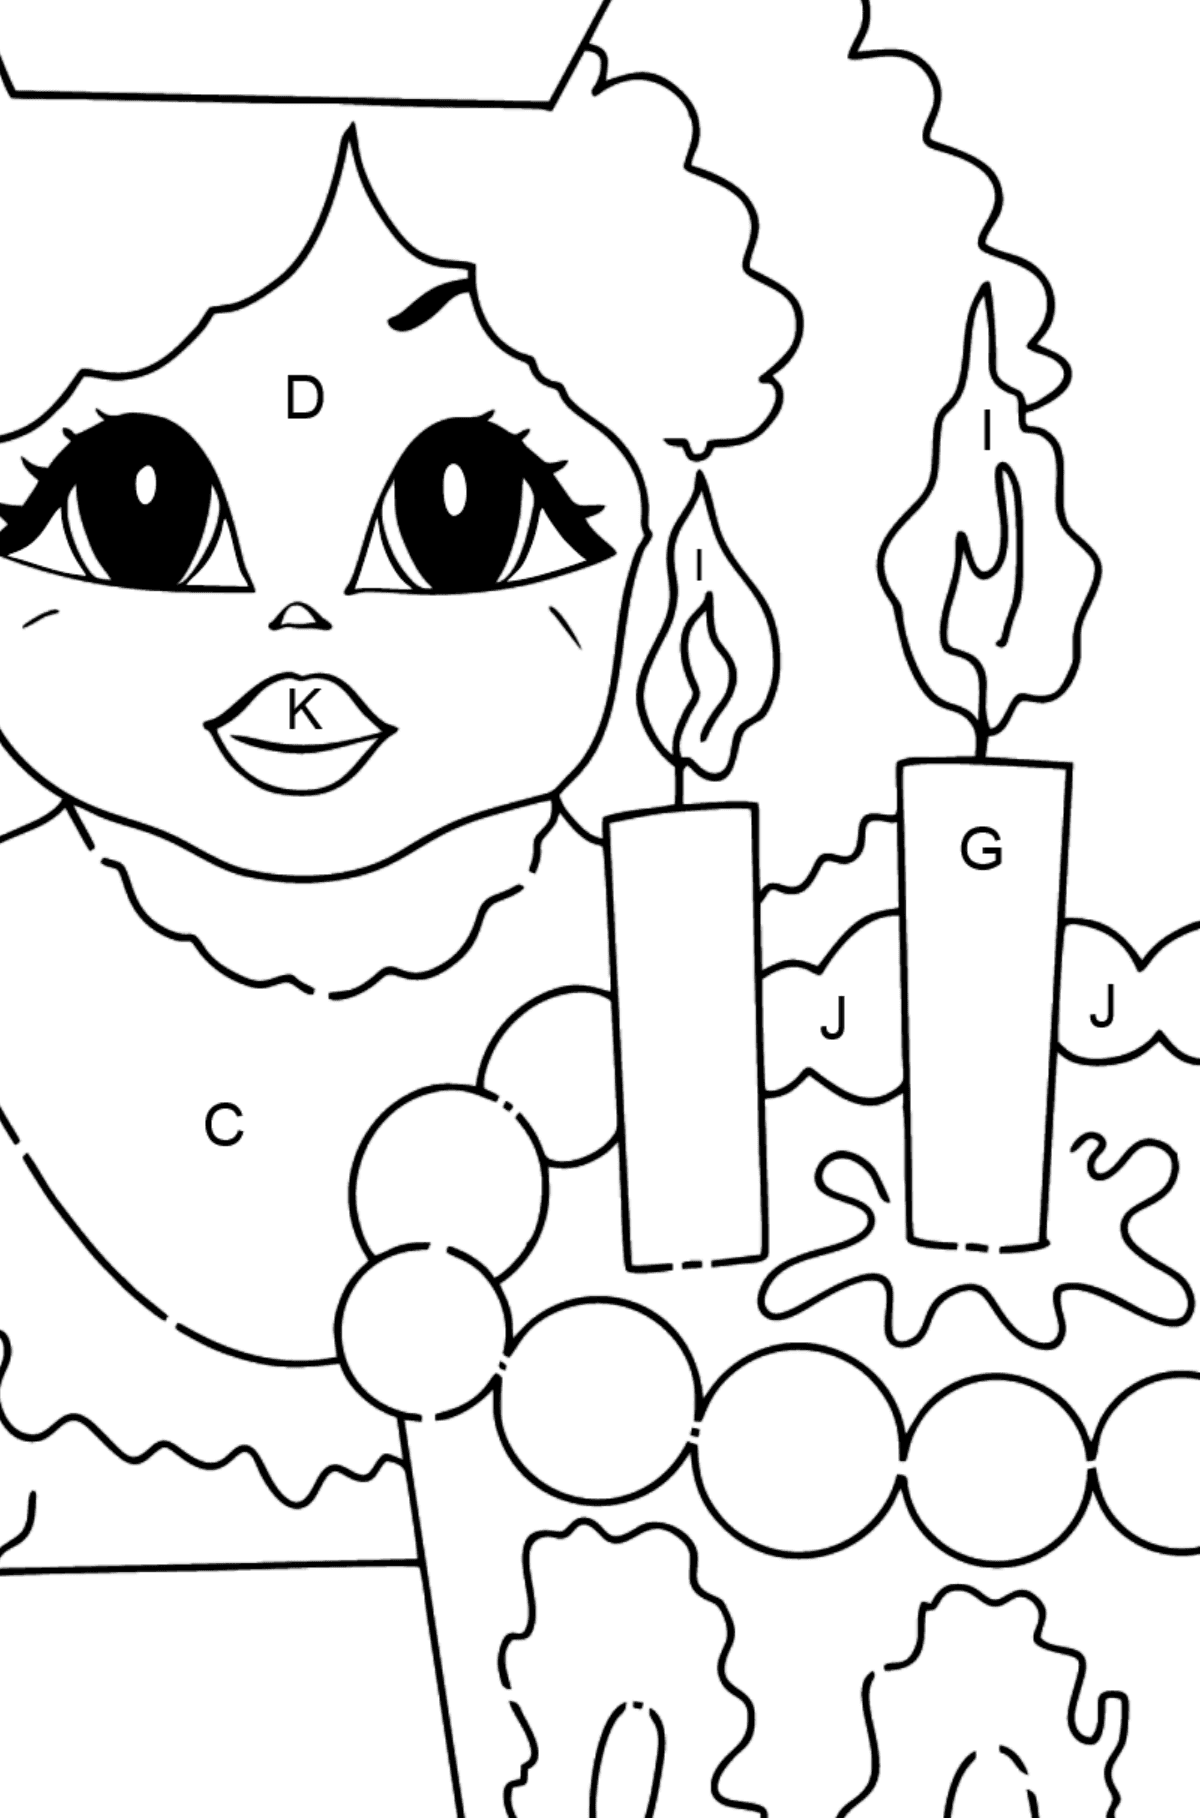 Coloring Page - A Princess with Cake - For Girls - Coloring by Letters for Kids